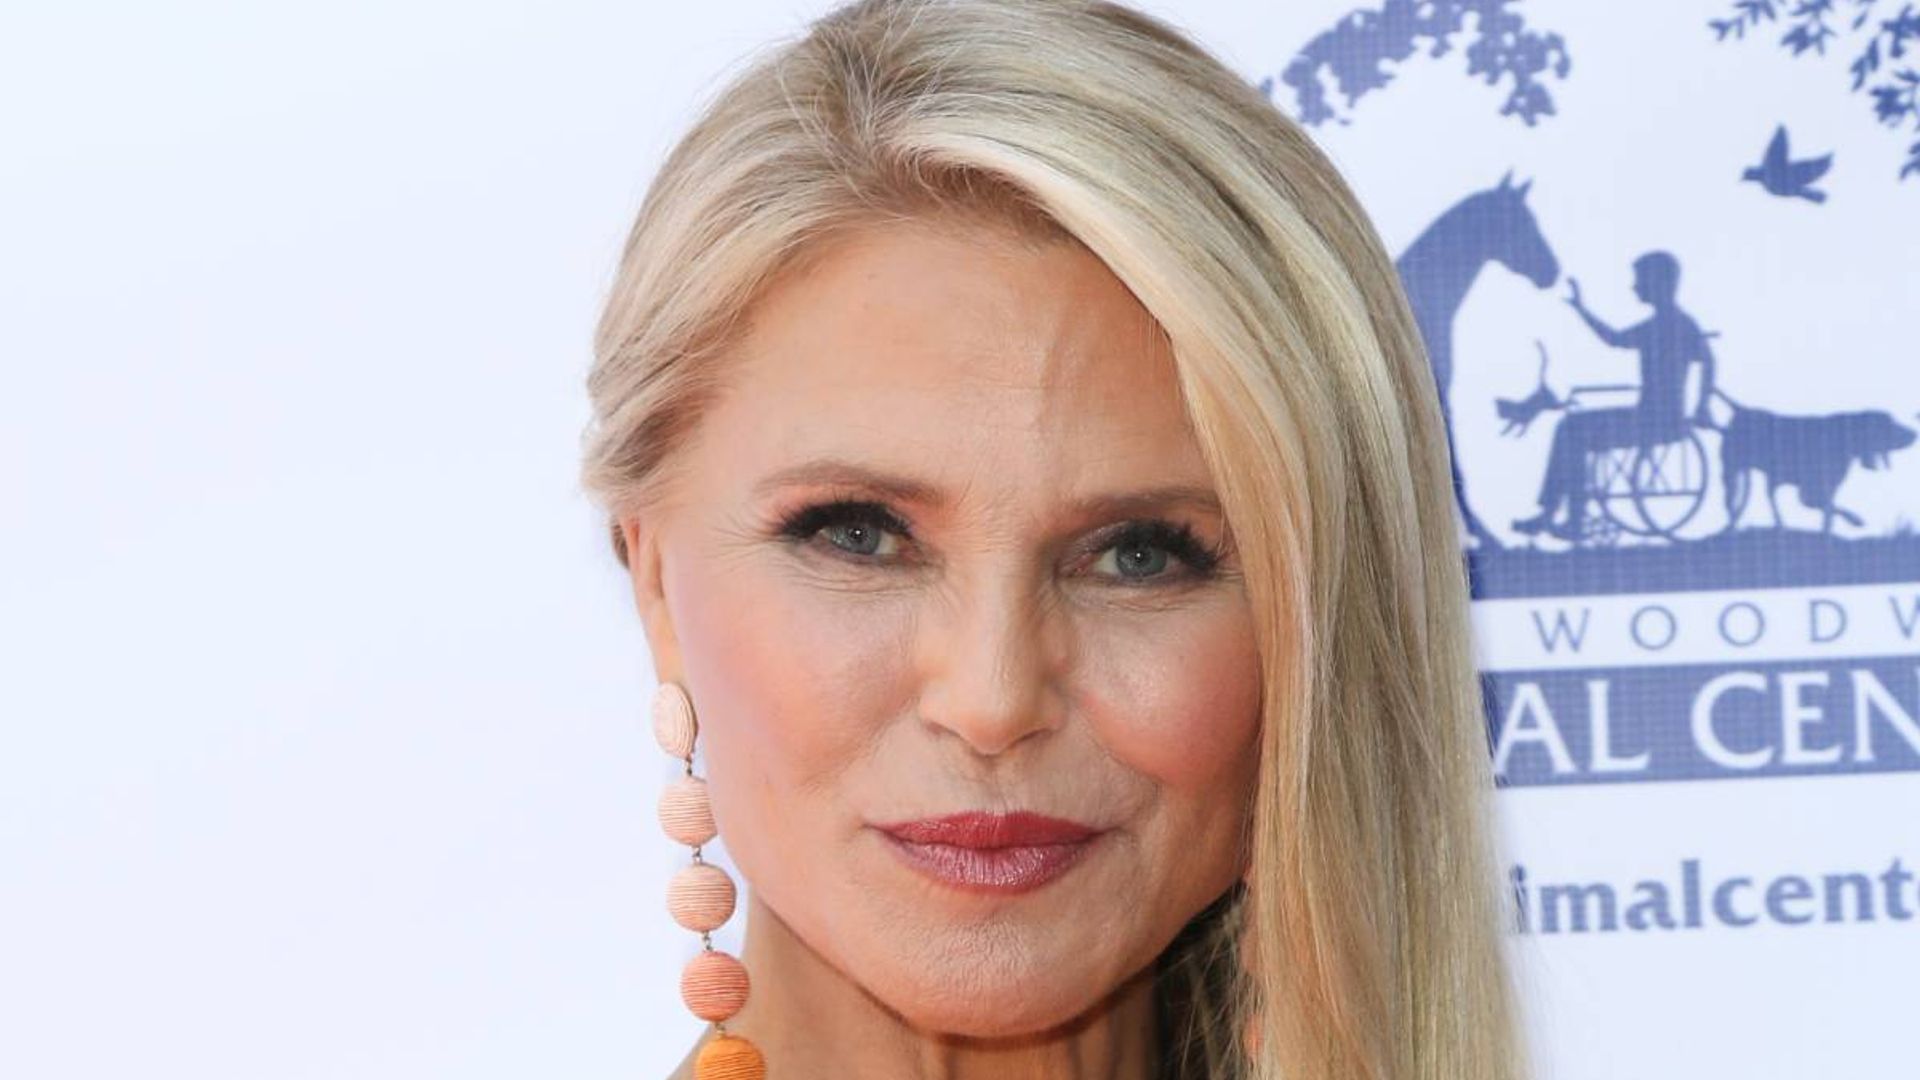 Christie Brinkley surprises fans with unexpected career news cut short due to health scare